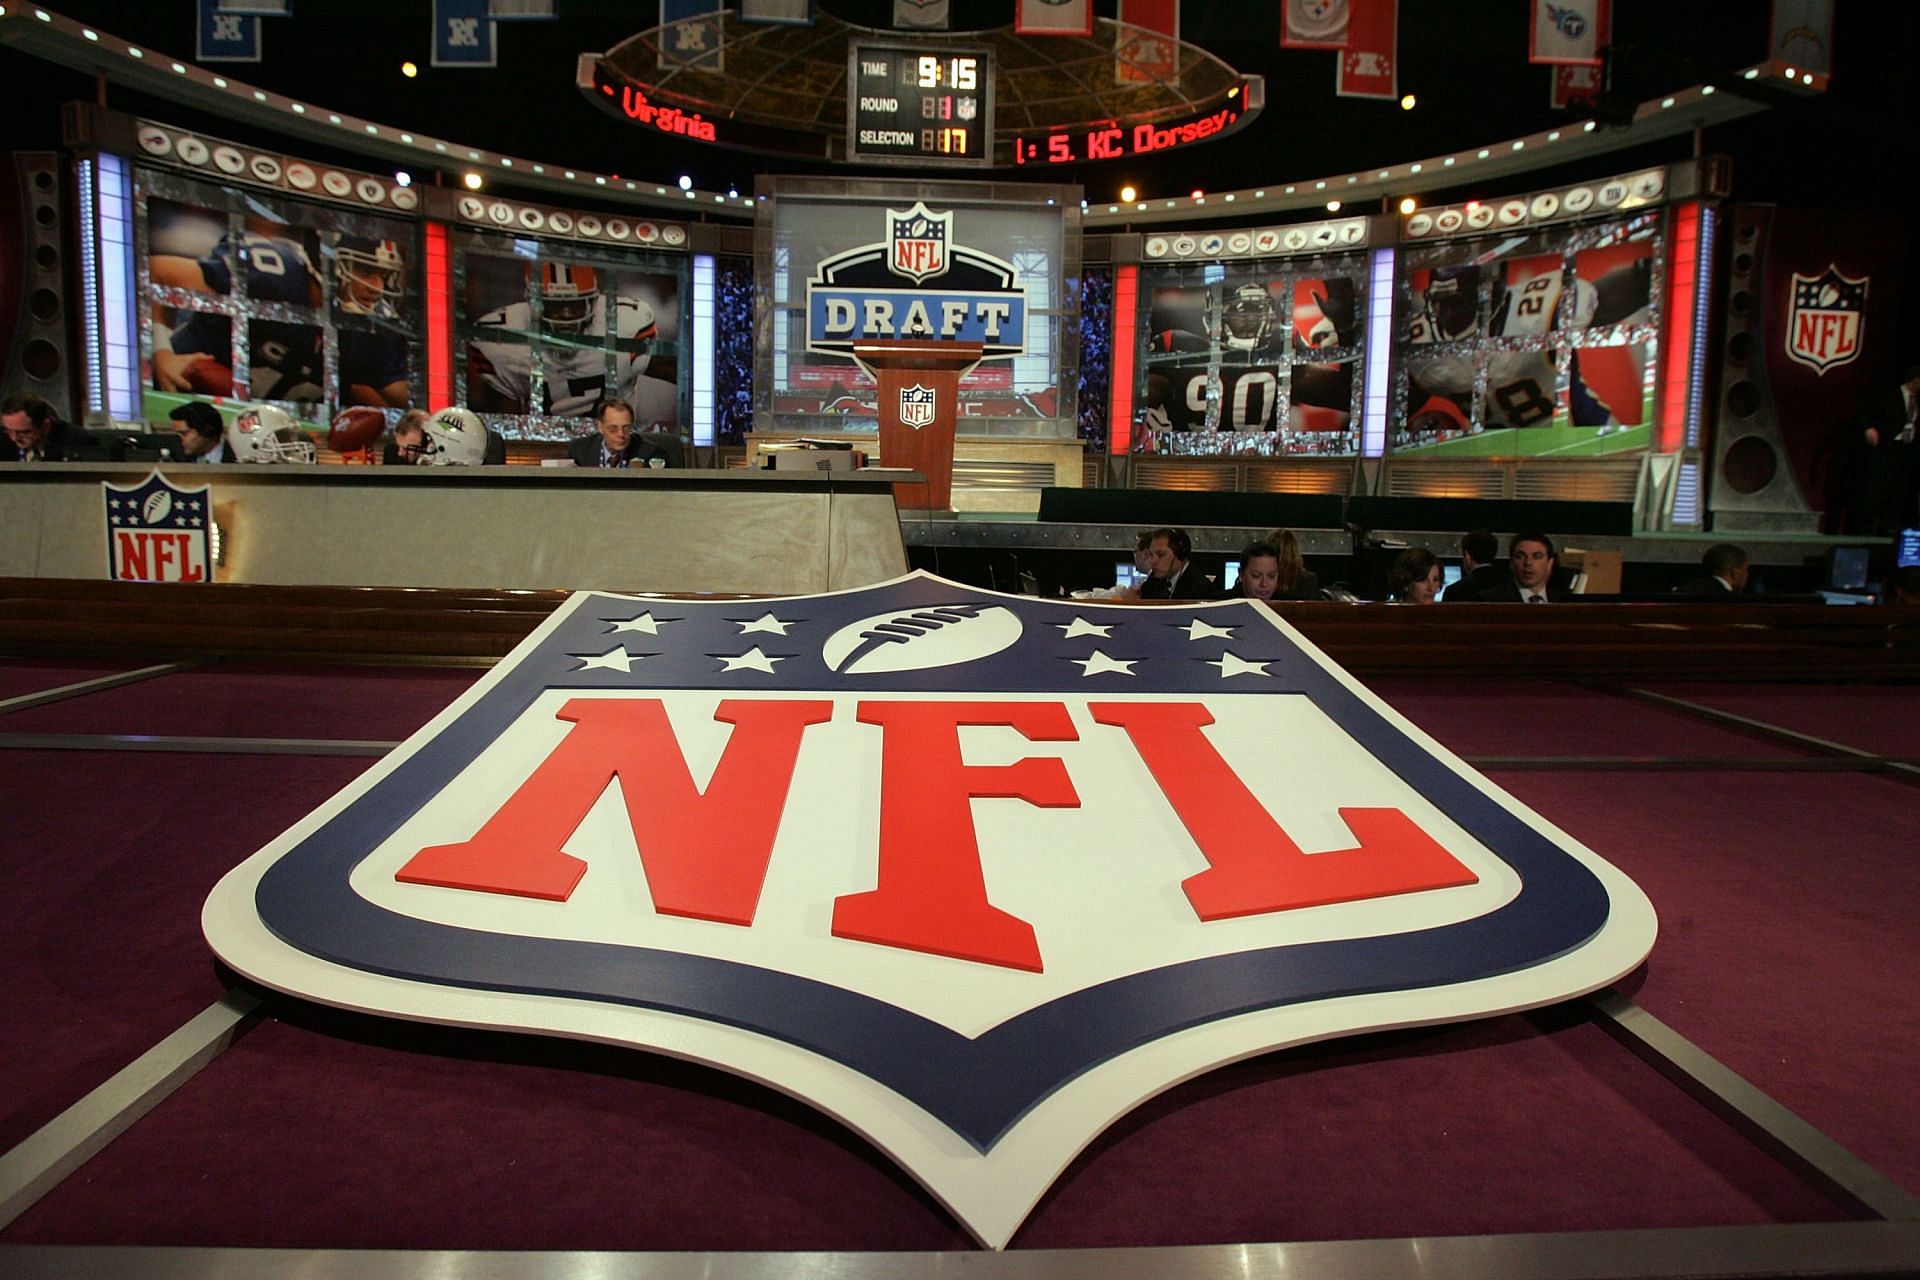 A general view shows the stage during the during the 2008 NFL Draft on April 26, 2008 at Radio City Music Hall in New York City.